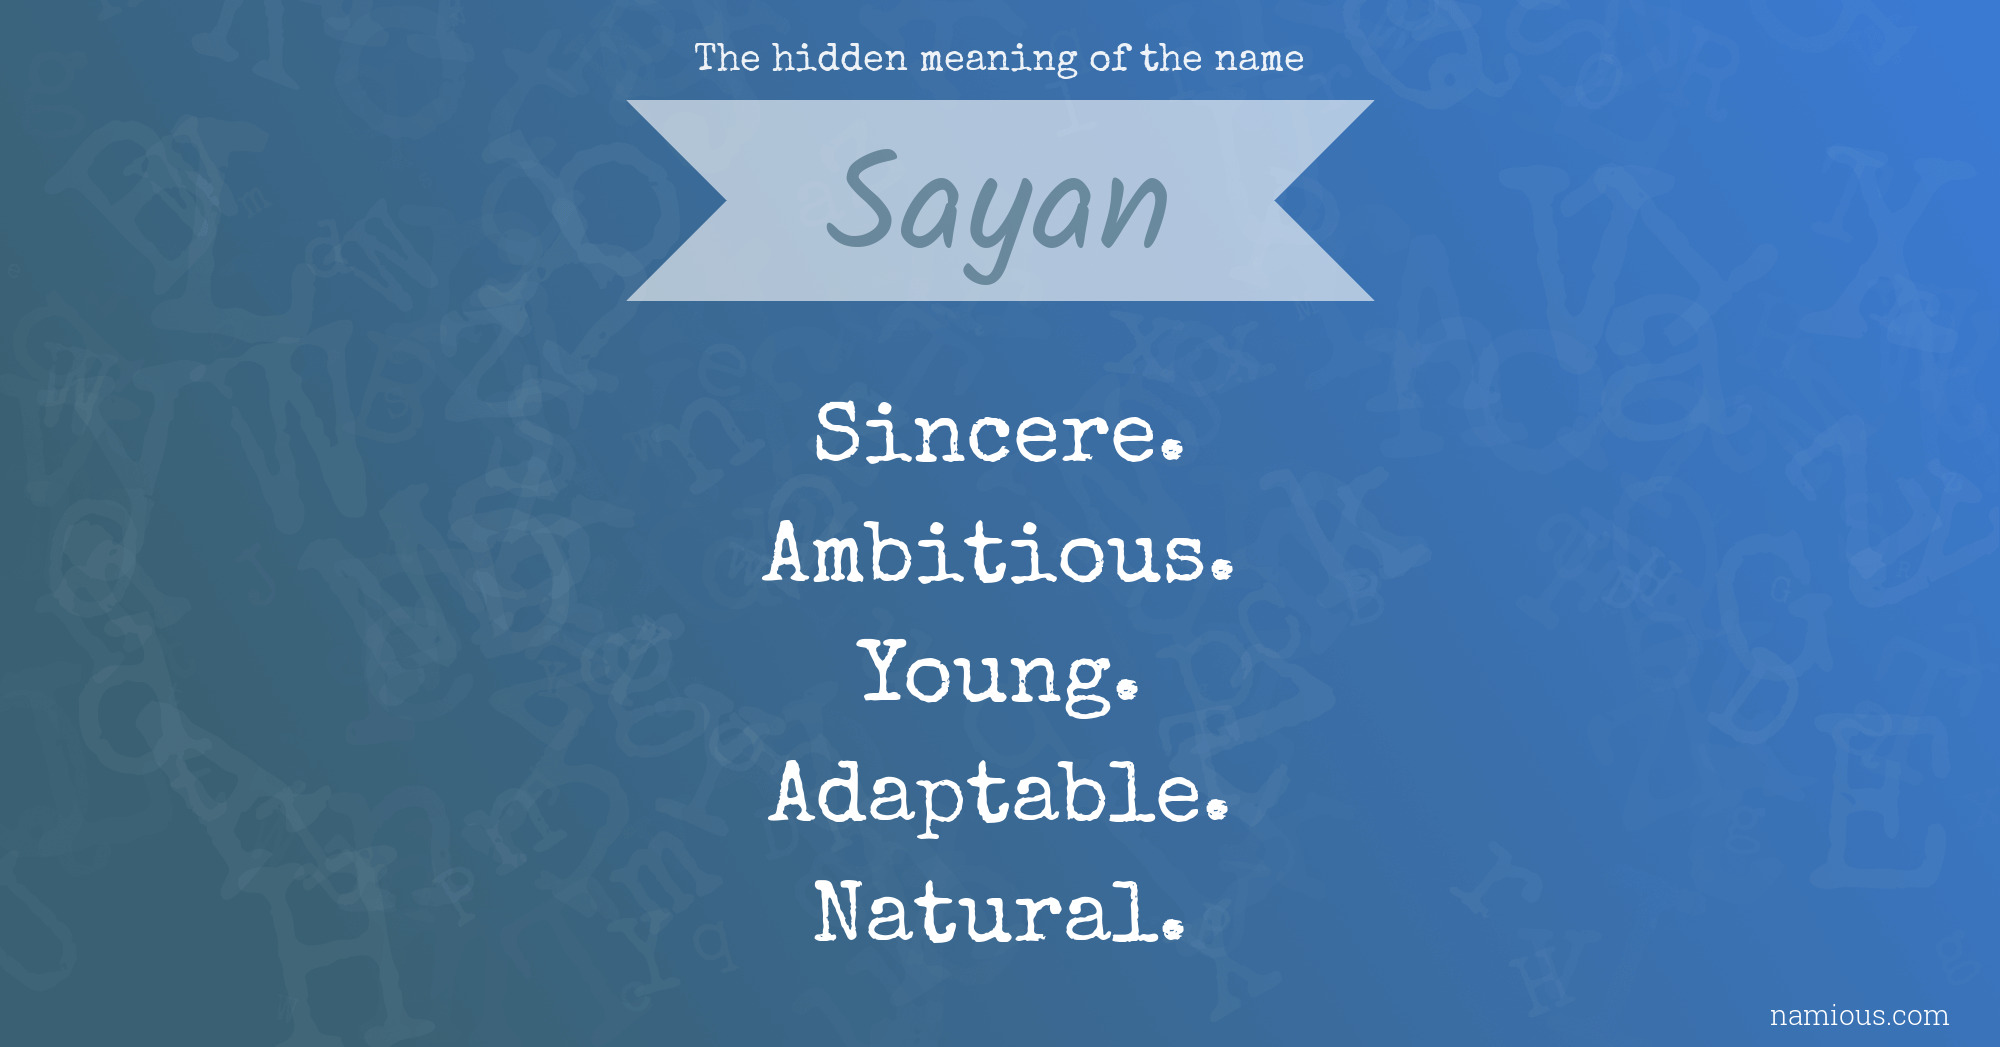 The hidden meaning of the name Sayan